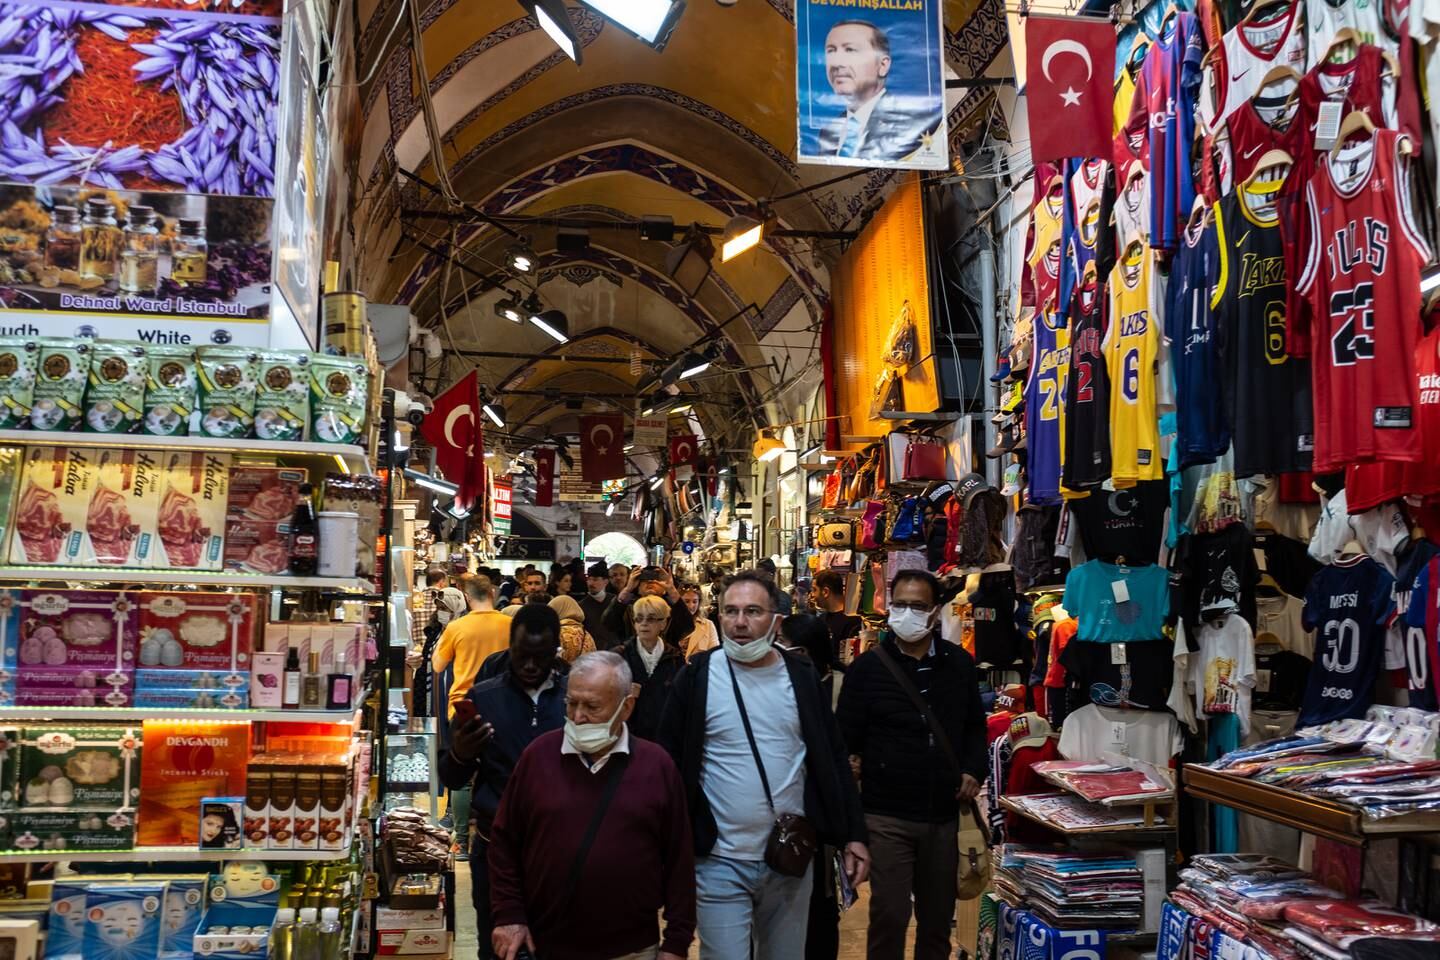 Visitors stroll through Istanbul's famous Grand Bazaar.Getty Images